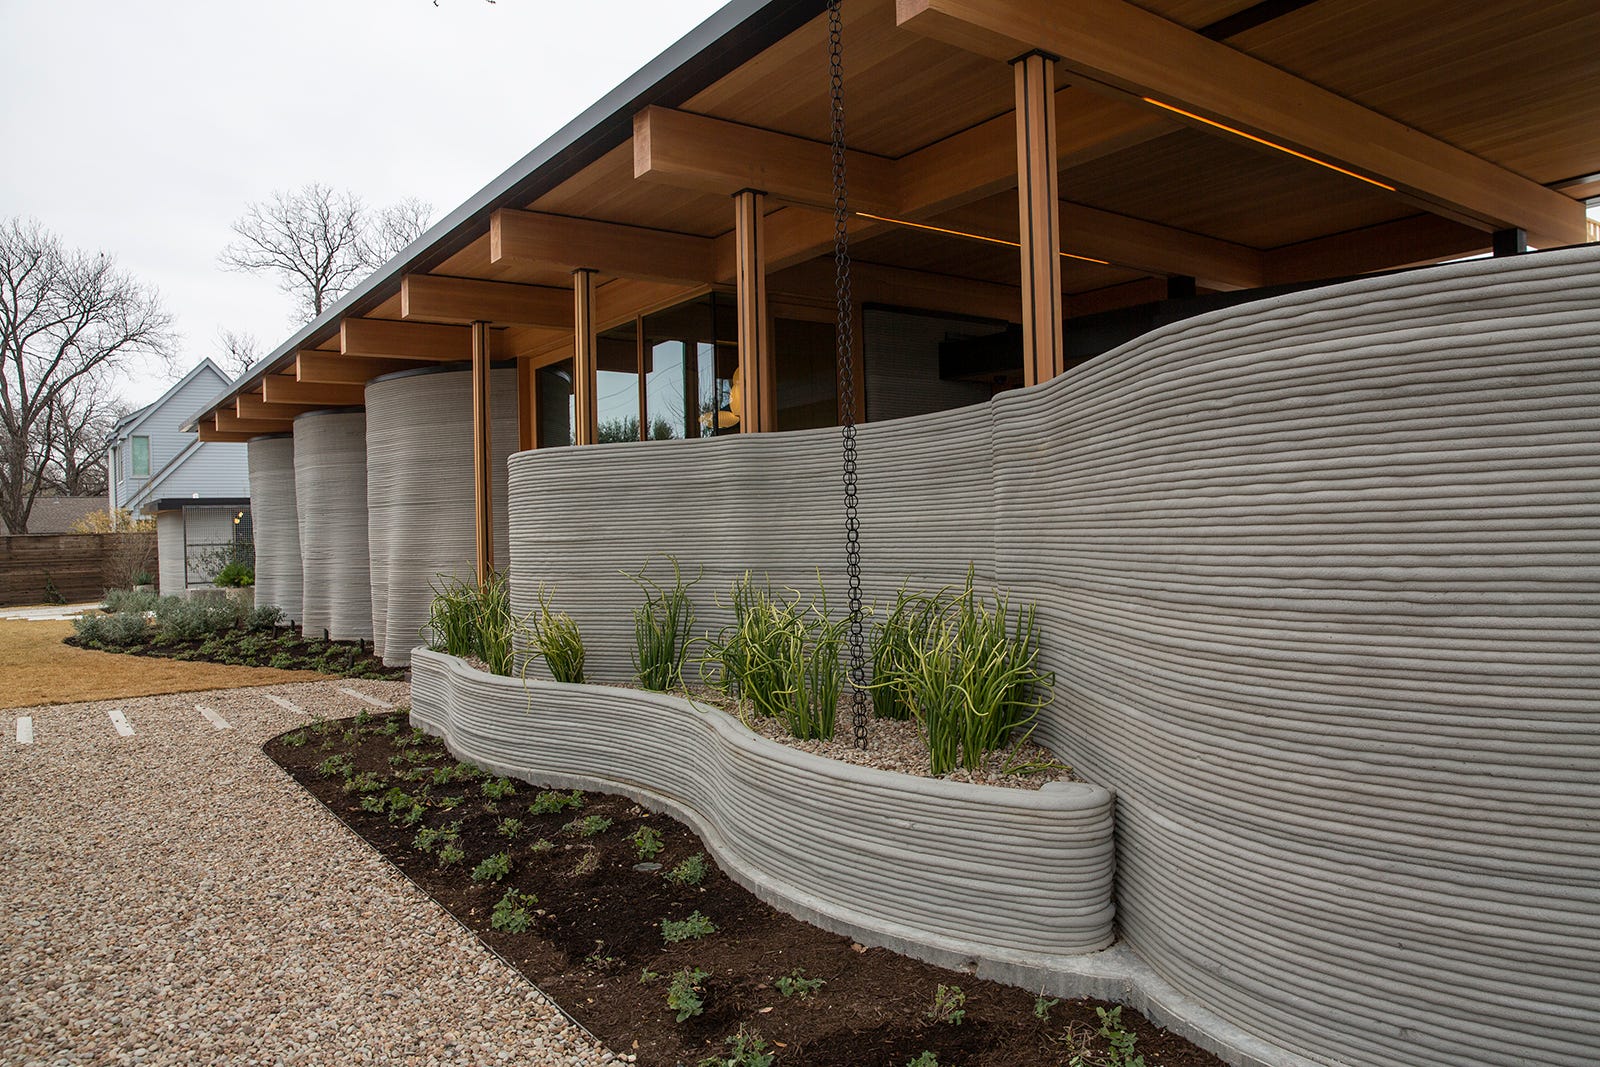 SXSW: Austin-based Icon shows the for 3D-printed homes